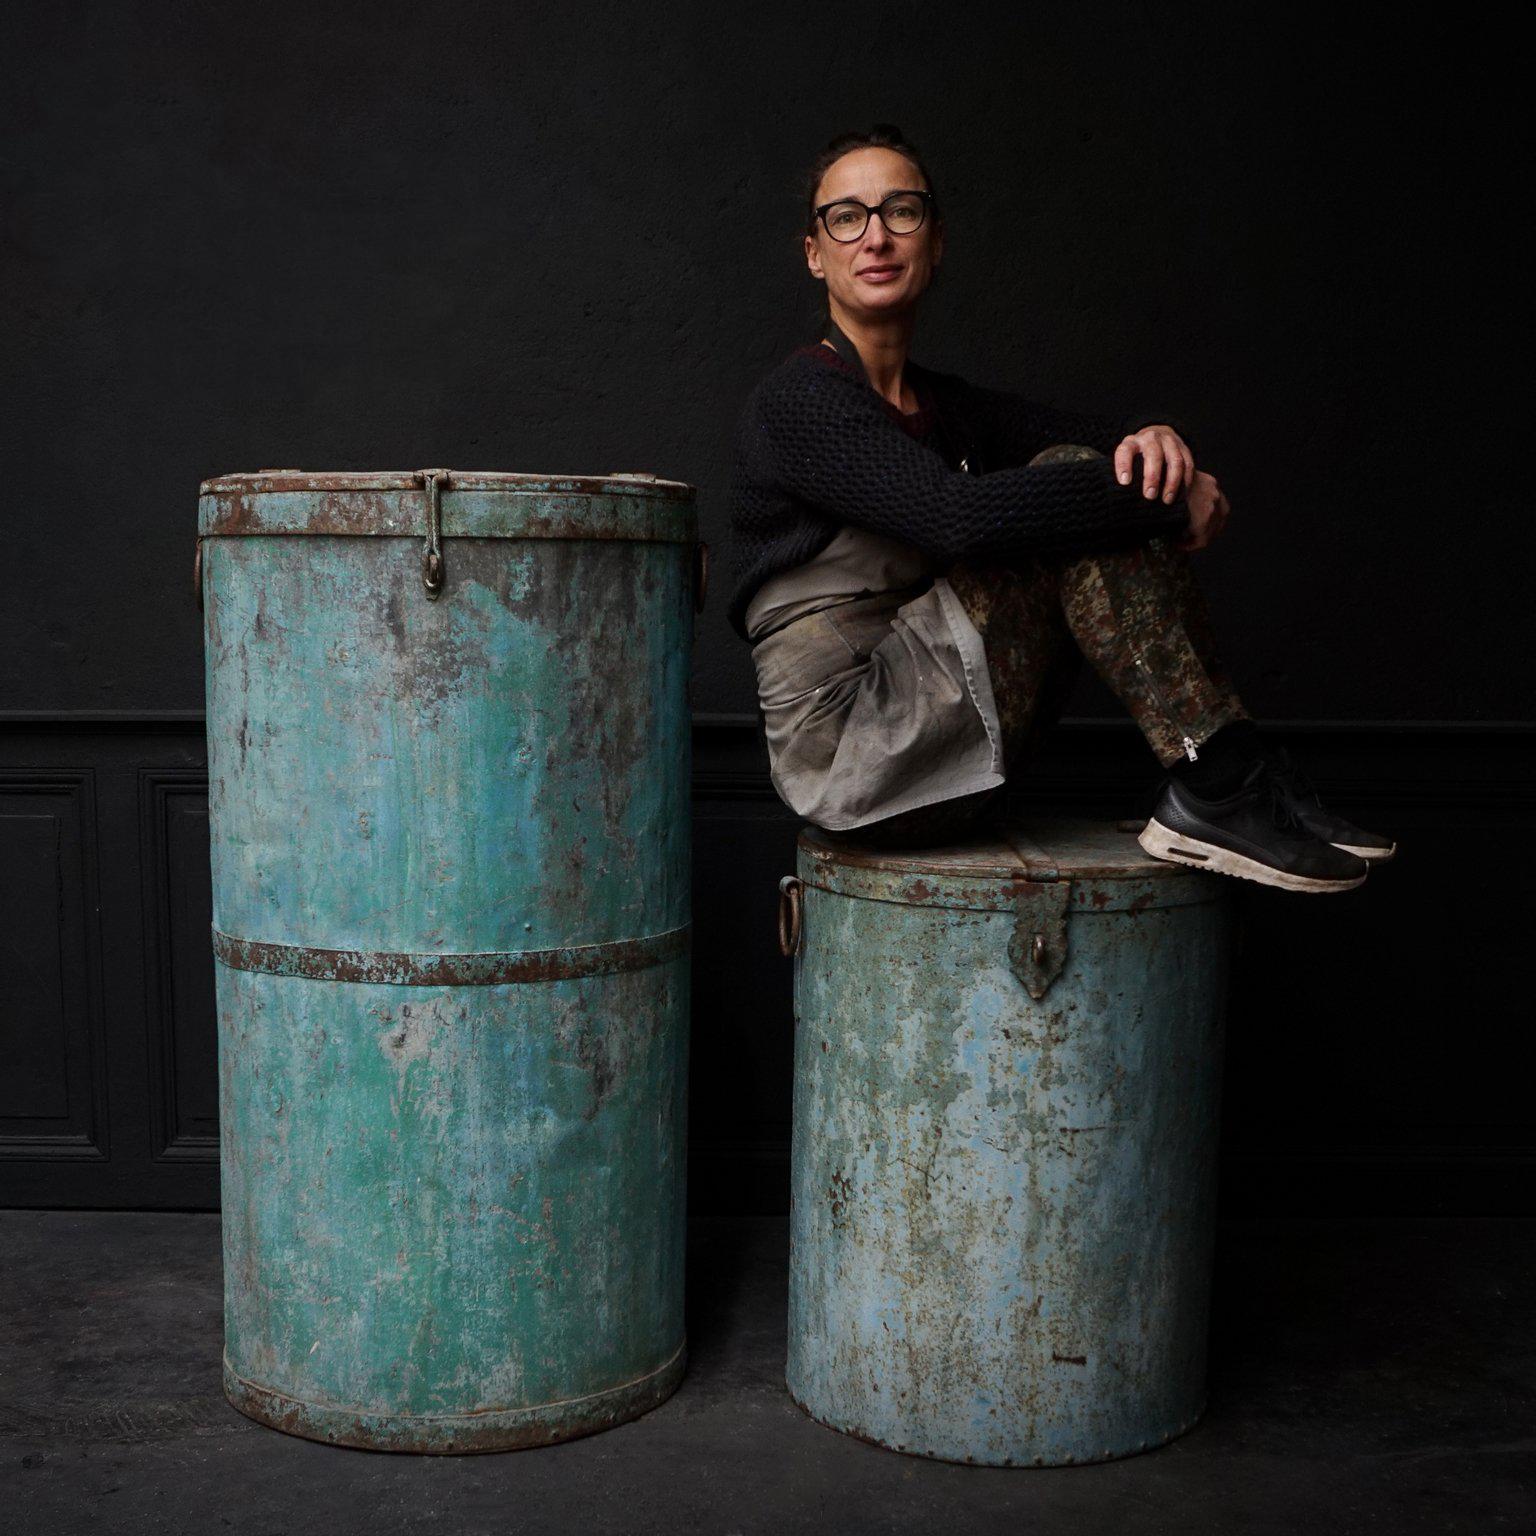 Beautiful Industrial metal barrels or drums with hinged lids.
Not quit sure what they were used for, probably for any kind of dry goods that had to be stored.
This old turquoise rustic worn metal patine color is perfect. You could use them as high